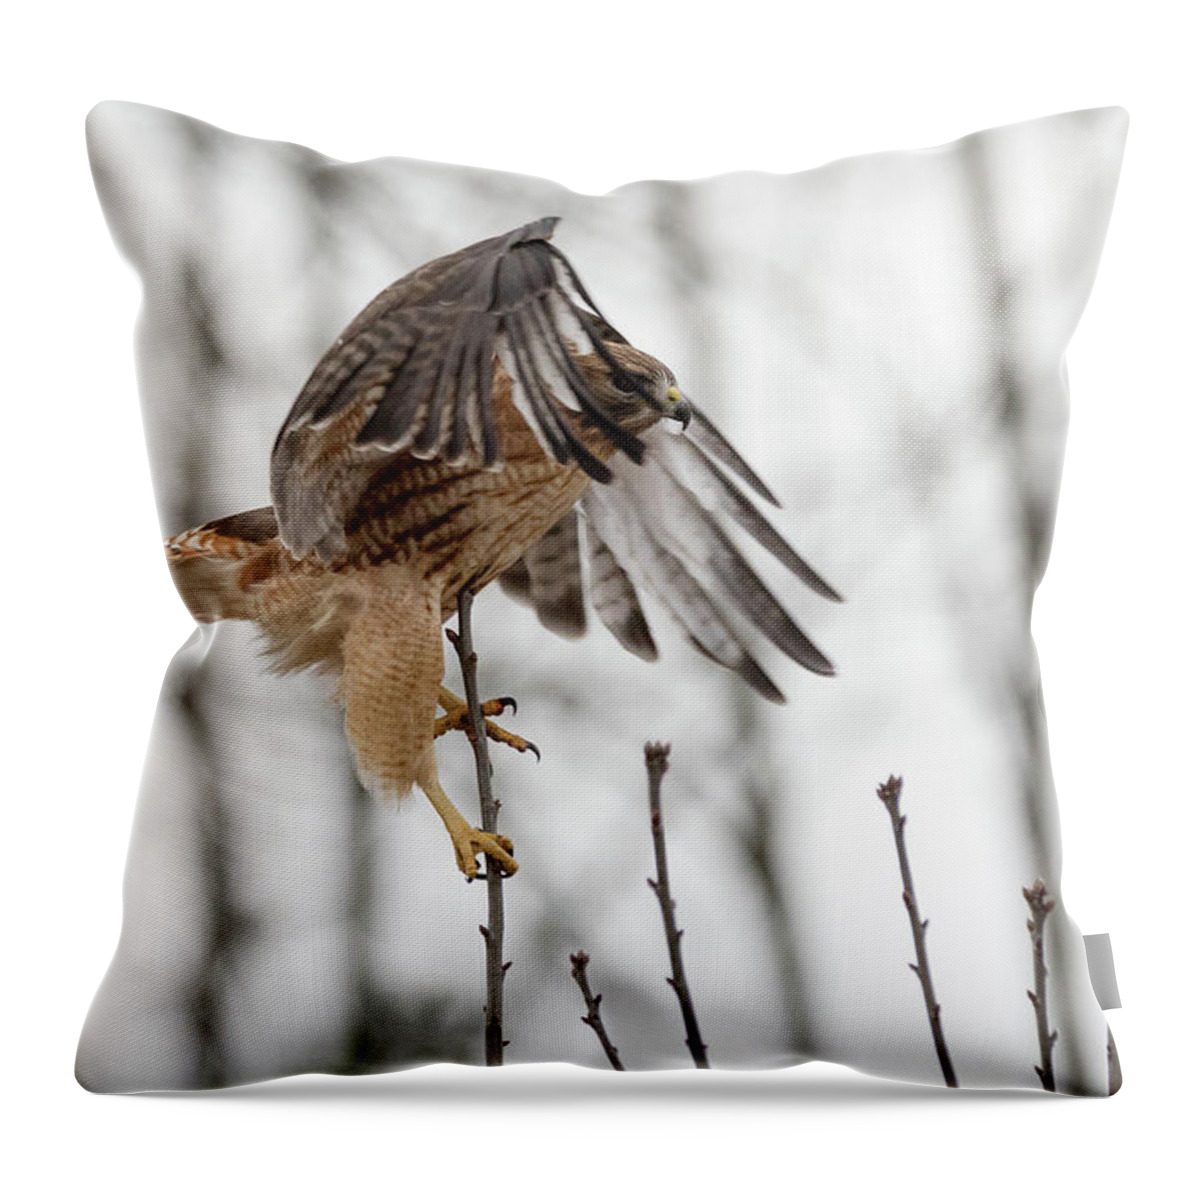 Westboylston Ma Mass Massachusetts Brian Hale Brianhalephoto Newengland New England Nicitating Membrane Blink Blinking Eye Eyelide Portrait Closeup Close Up Redtail Red-tail Red-shoulder Redshouldered Shouldered Red Tail Shoulder Hybrid Hawk Rare Come At Me Bro Throw Pillow featuring the photograph Come at me Bro by Brian Hale